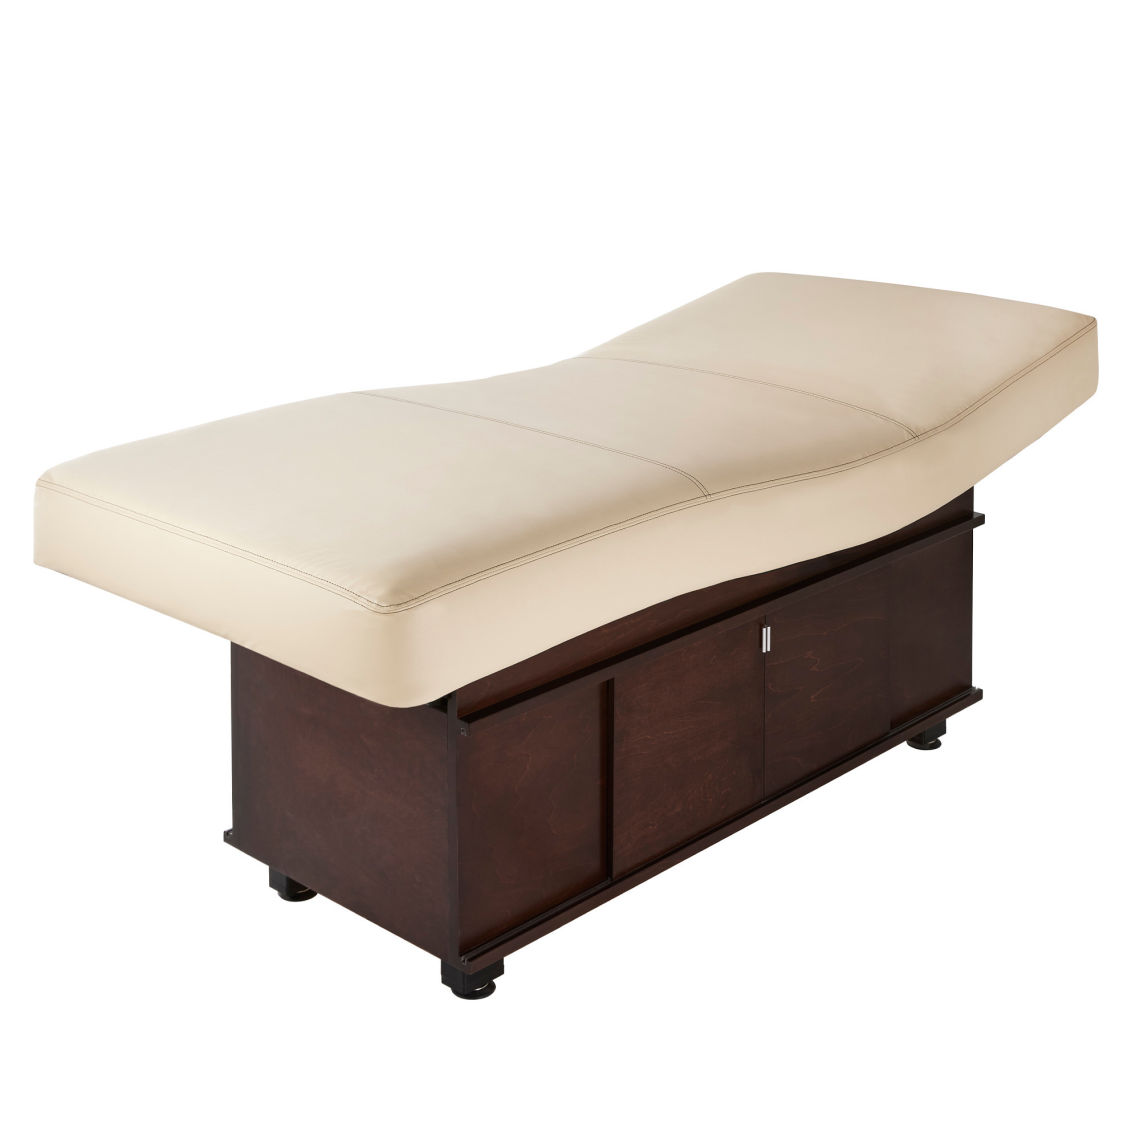 Spavision | Insignia Classic™ Multi-purpose treatment table with replaceable mattress